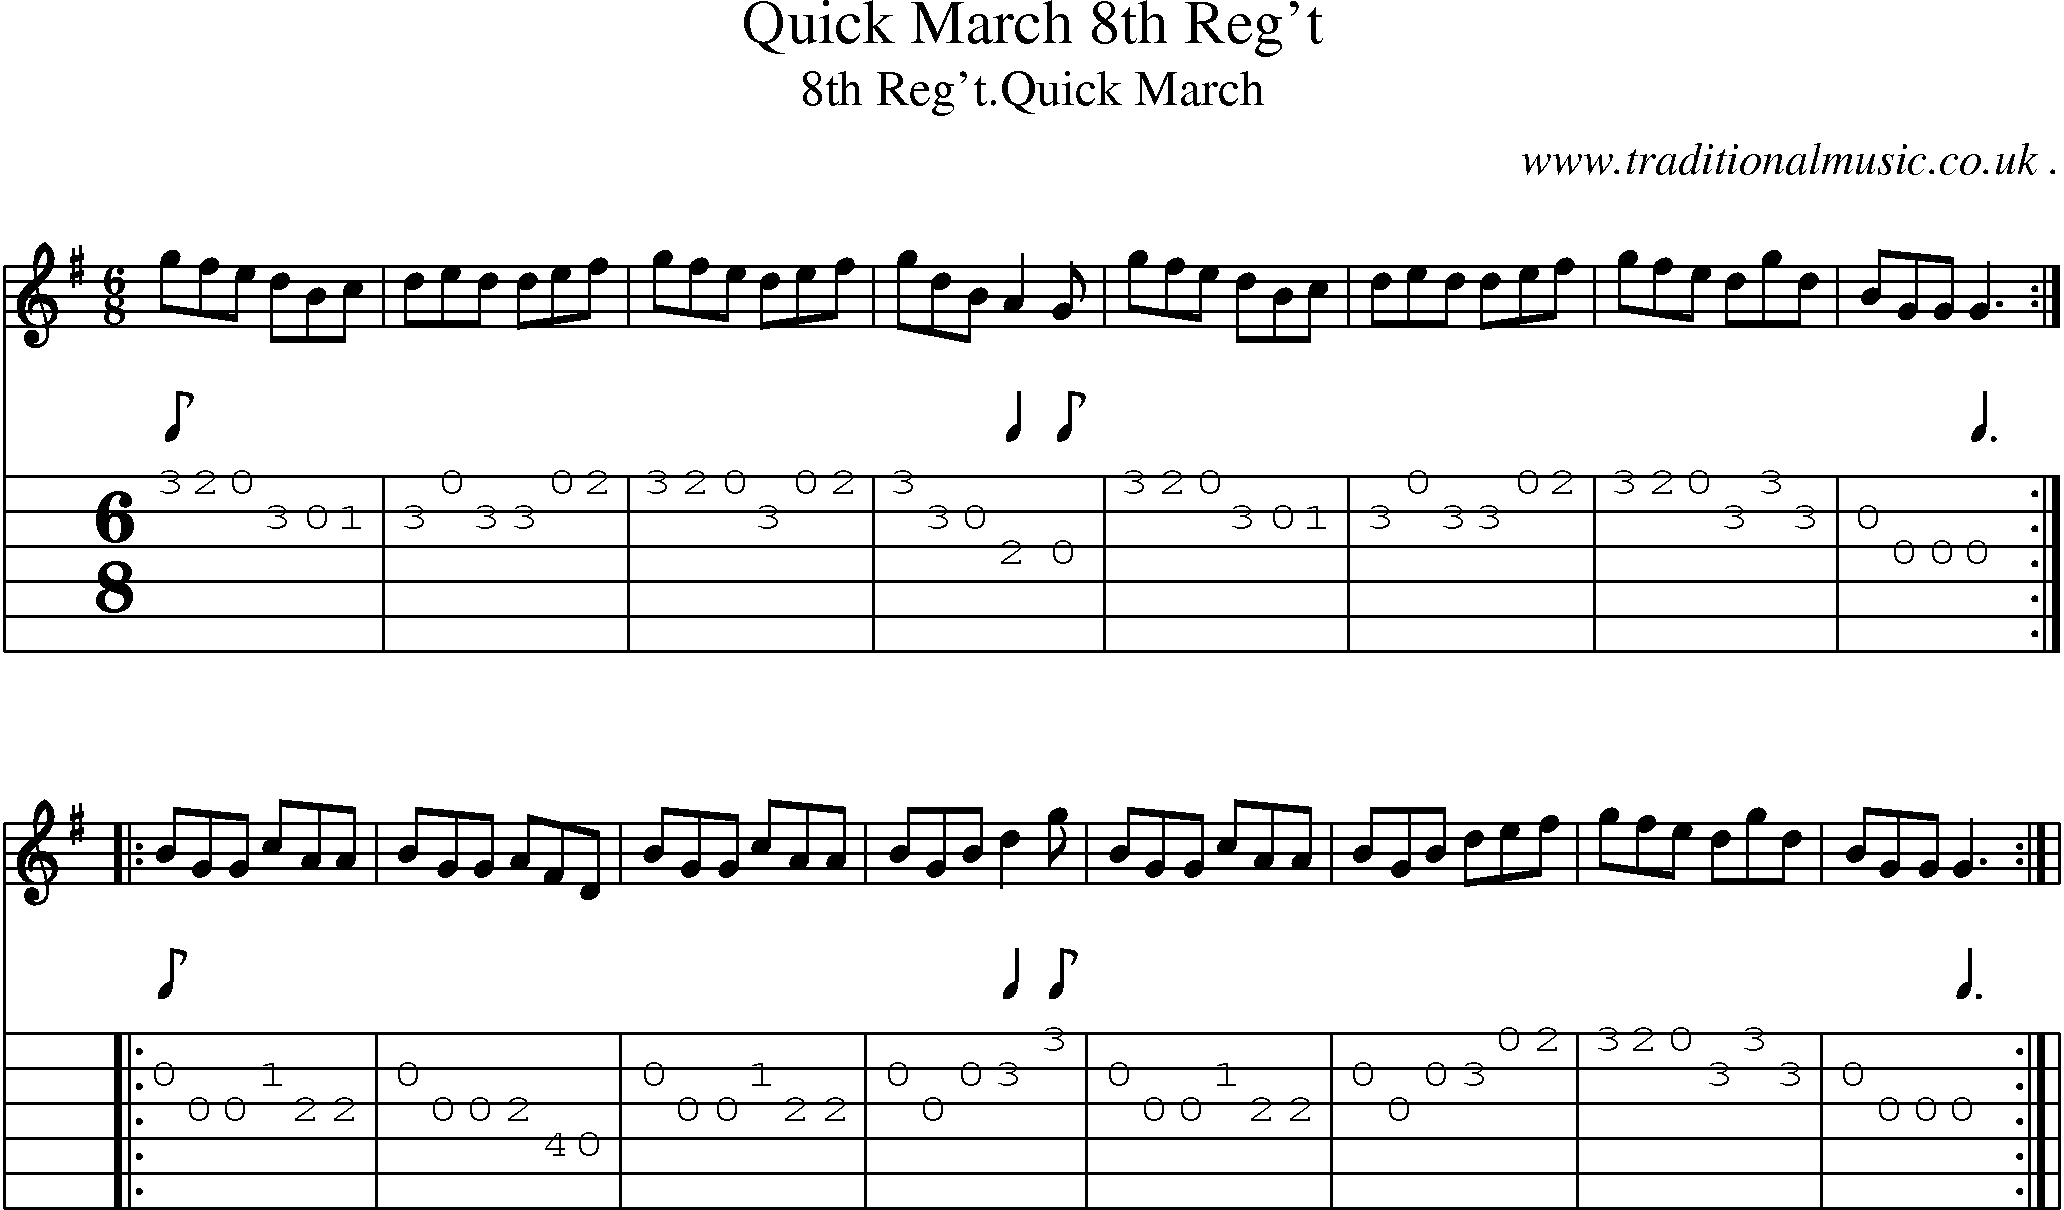 Sheet-Music and Guitar Tabs for Quick March 8th Reg